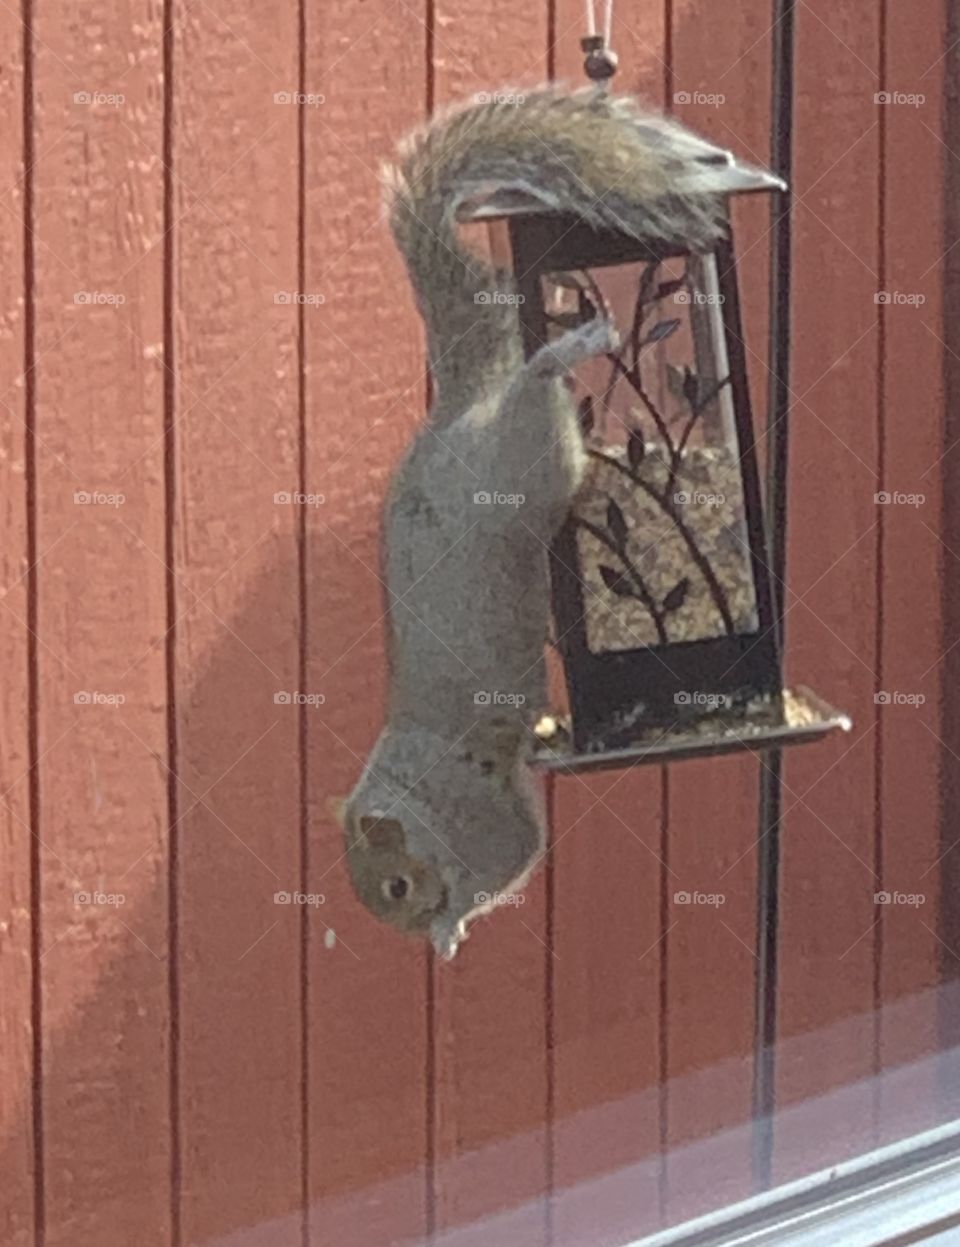 Squirrel lunch time! 